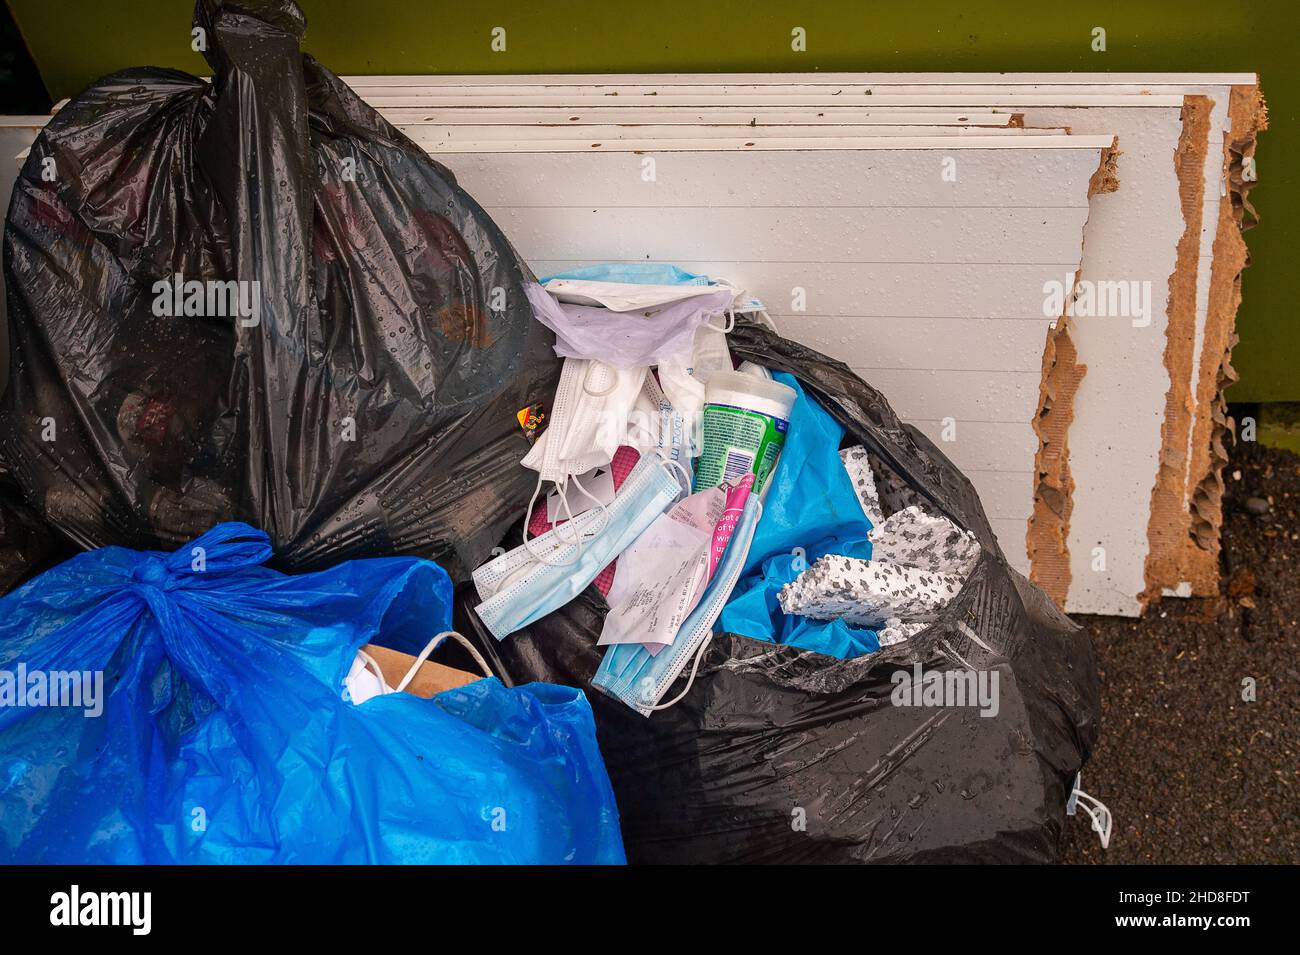 Windsor, Berkshire, UK. 4th January, 2022. Despite waste collection services in Windsor working as normal post the Christmas holidays, some people are still choosing to illegally fly tip their rubbish next to charity collection points. Credit: Maureen McLean/Alamy Stock Photo